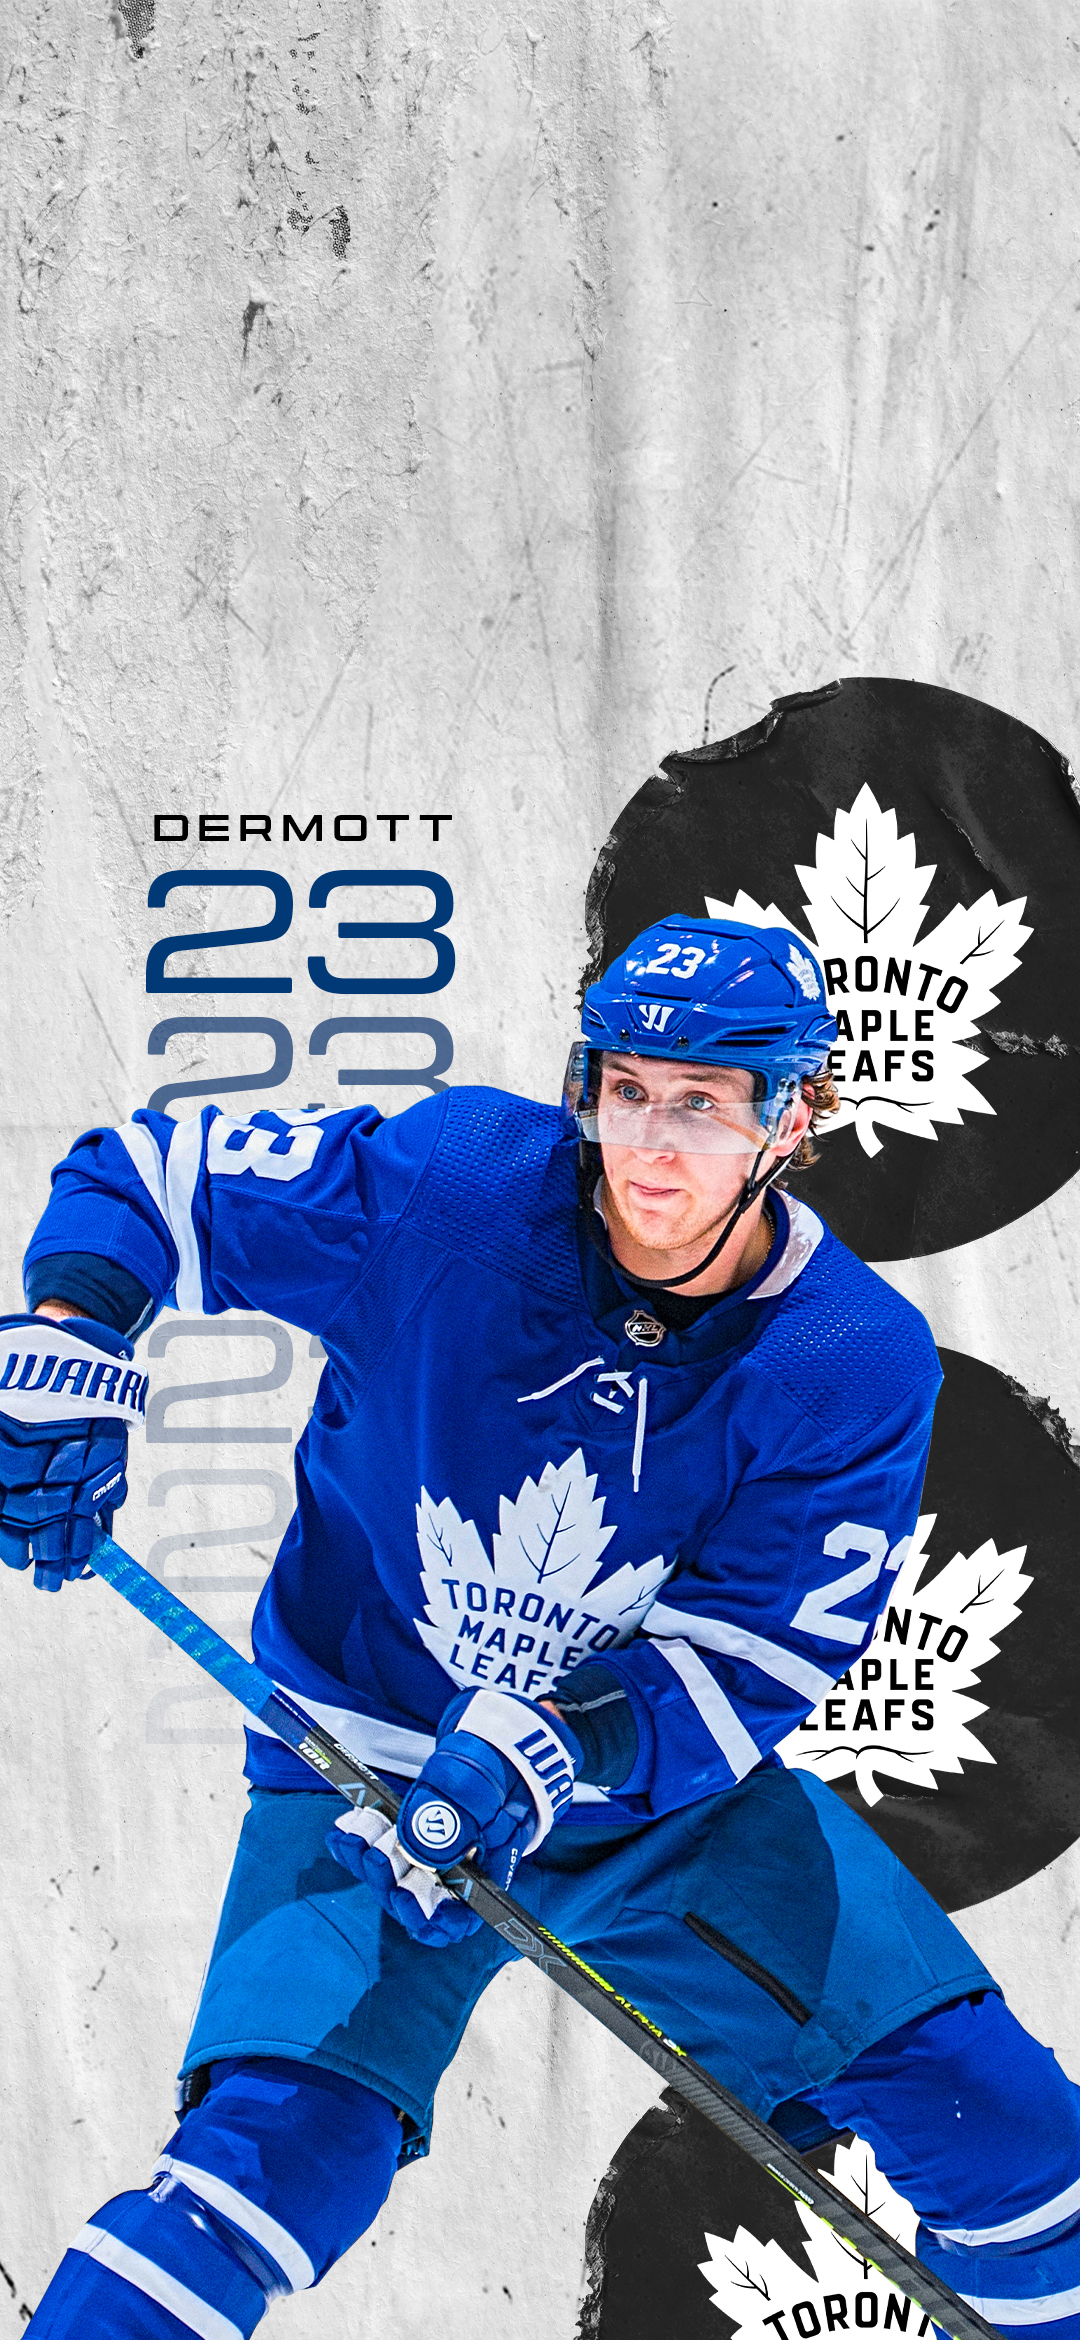 Toronto Maple Leafs on X: #NextGenGame 🔥 for your lock screens